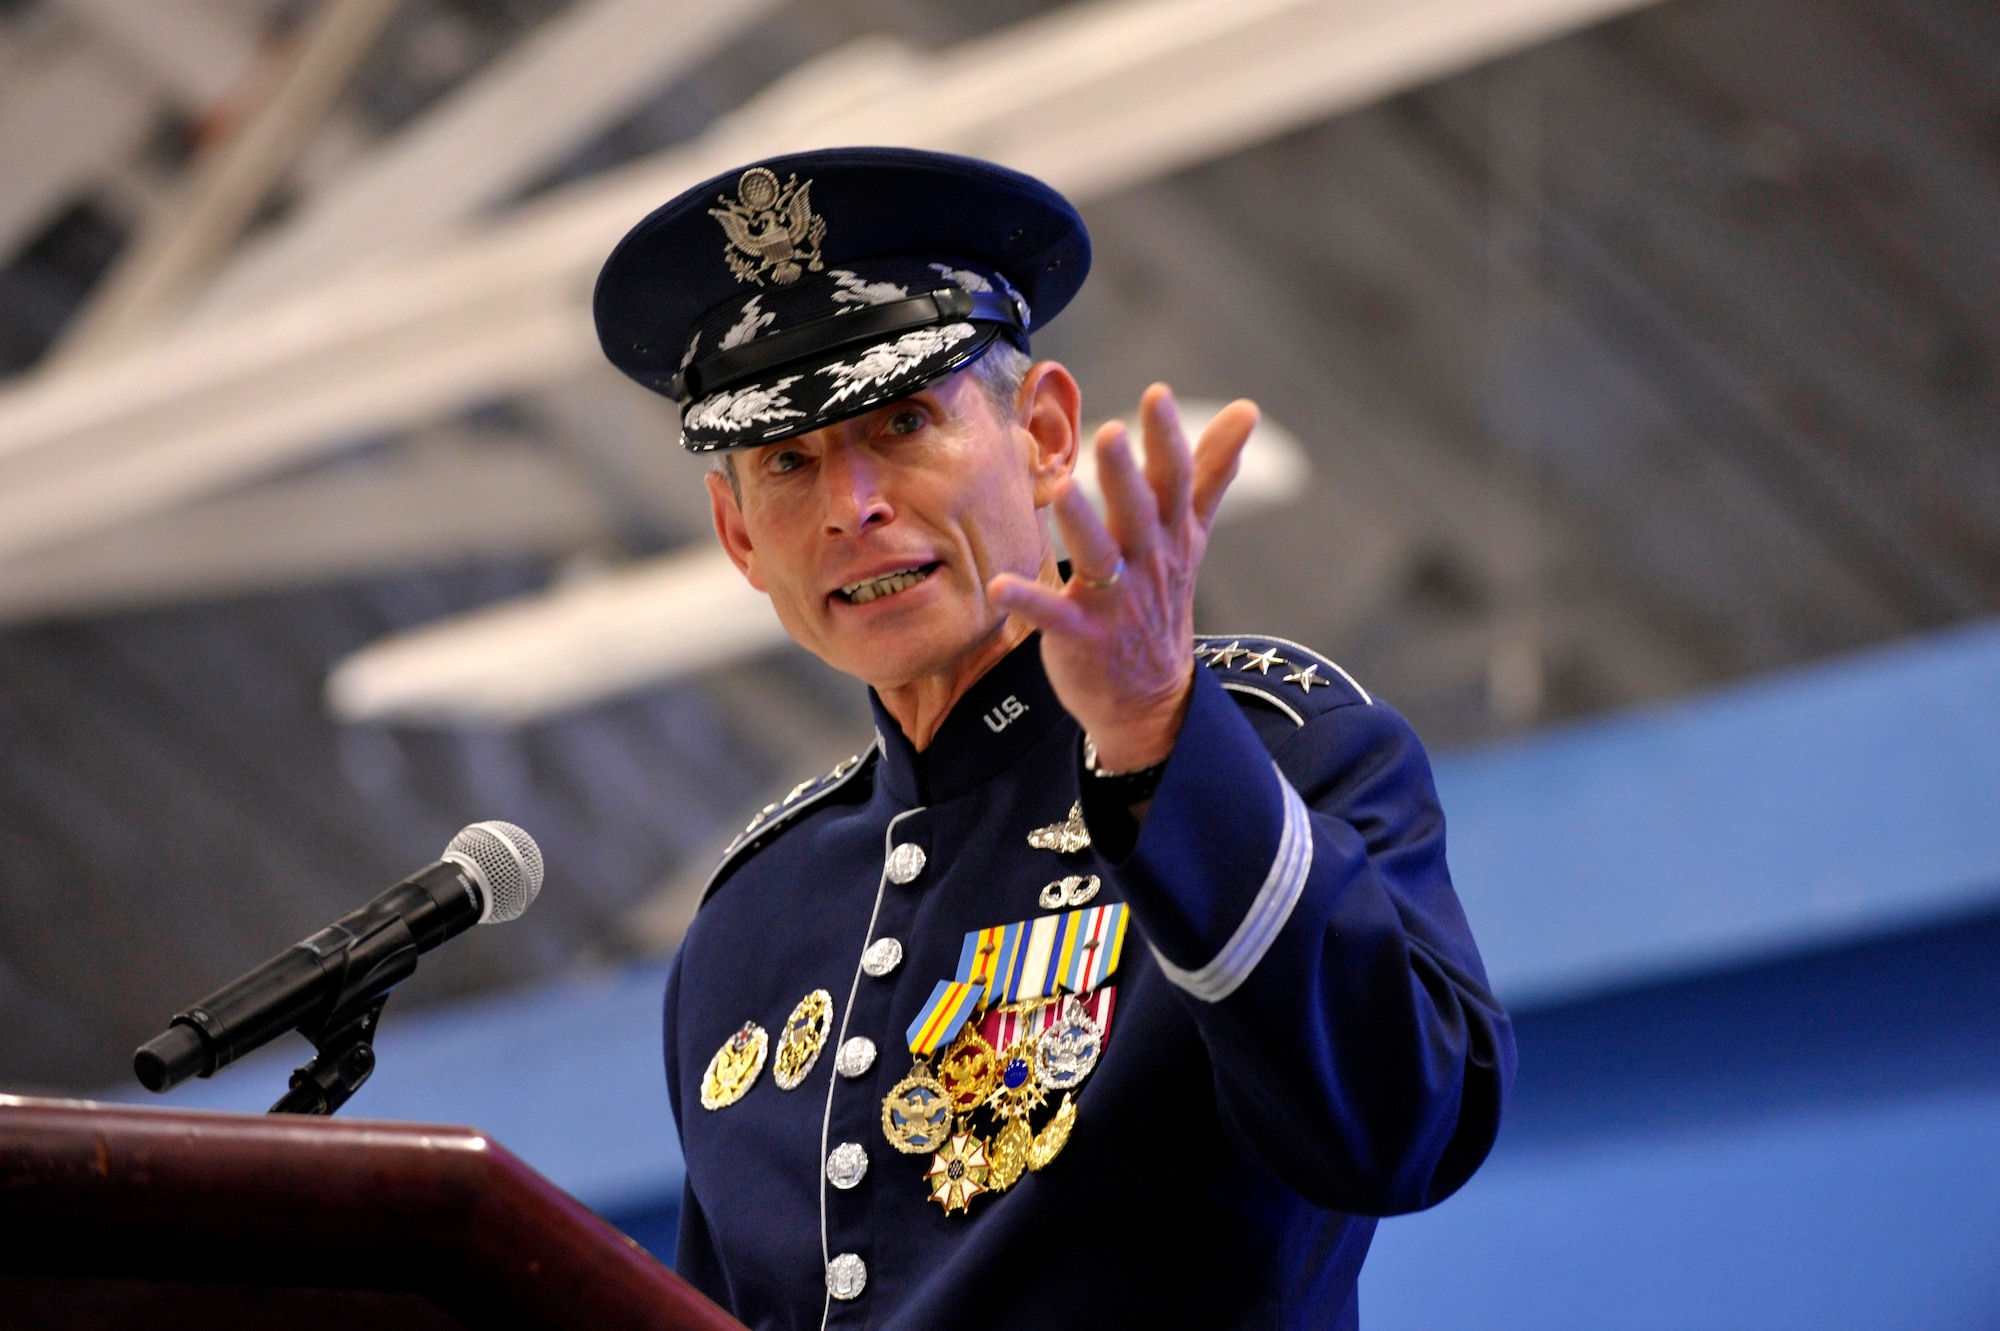 Gen. Norton Schwartz addresses the audience during the Air Force chief of staff transition ceremony at Joint Base Andrews, Md., Aug. 10, 2012. Schwartz served in the Air Force for 39 years, the last four years as the Air Force's senior uniformed leader. (U.S. Air Force photo/Michael J. Pausic)